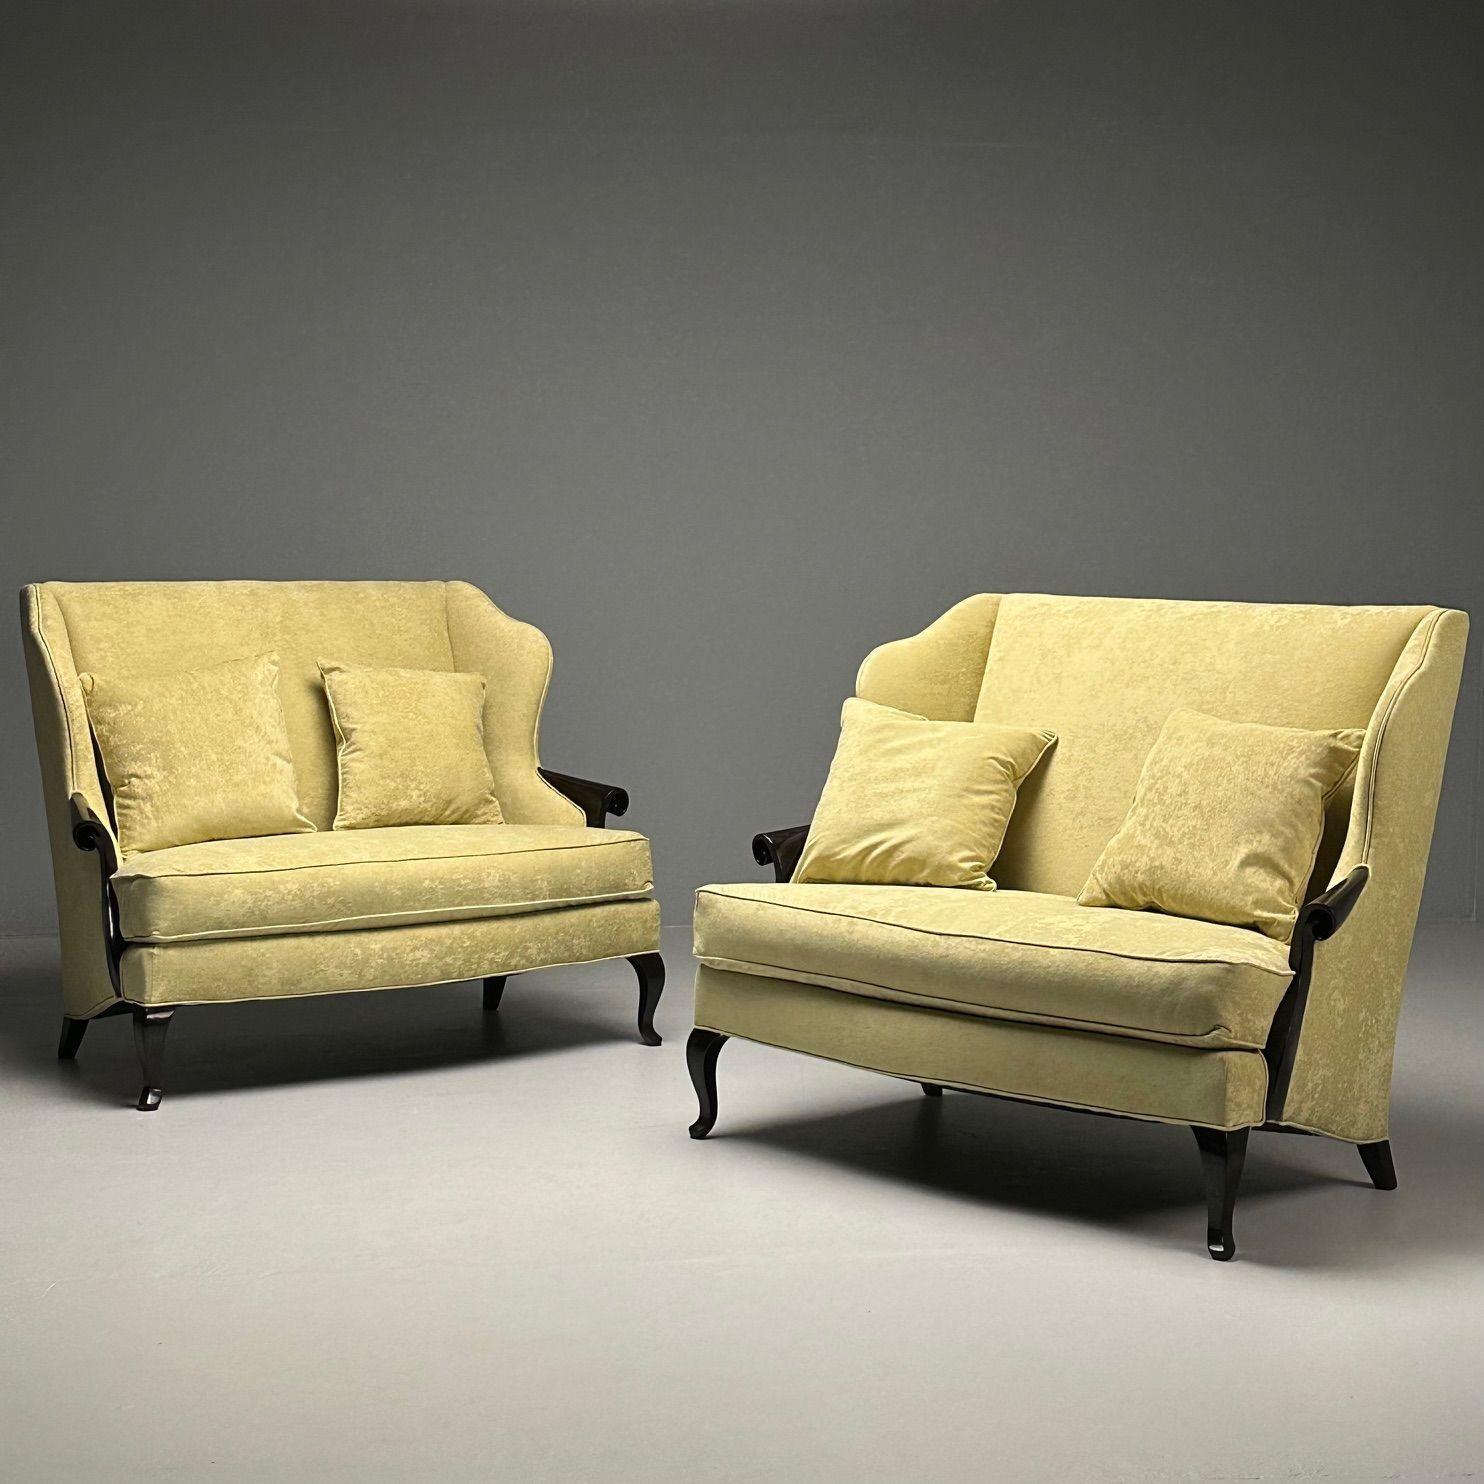 Christopher Guy, Contemporary, Sofas or Settees, Celadon Velvet, Mahogany

Pair of sleek and stylish modern sofas or settees designed by Christopher Guy. Newly upholstered in Celadon green velvet with two matching throw pillows. This work features a